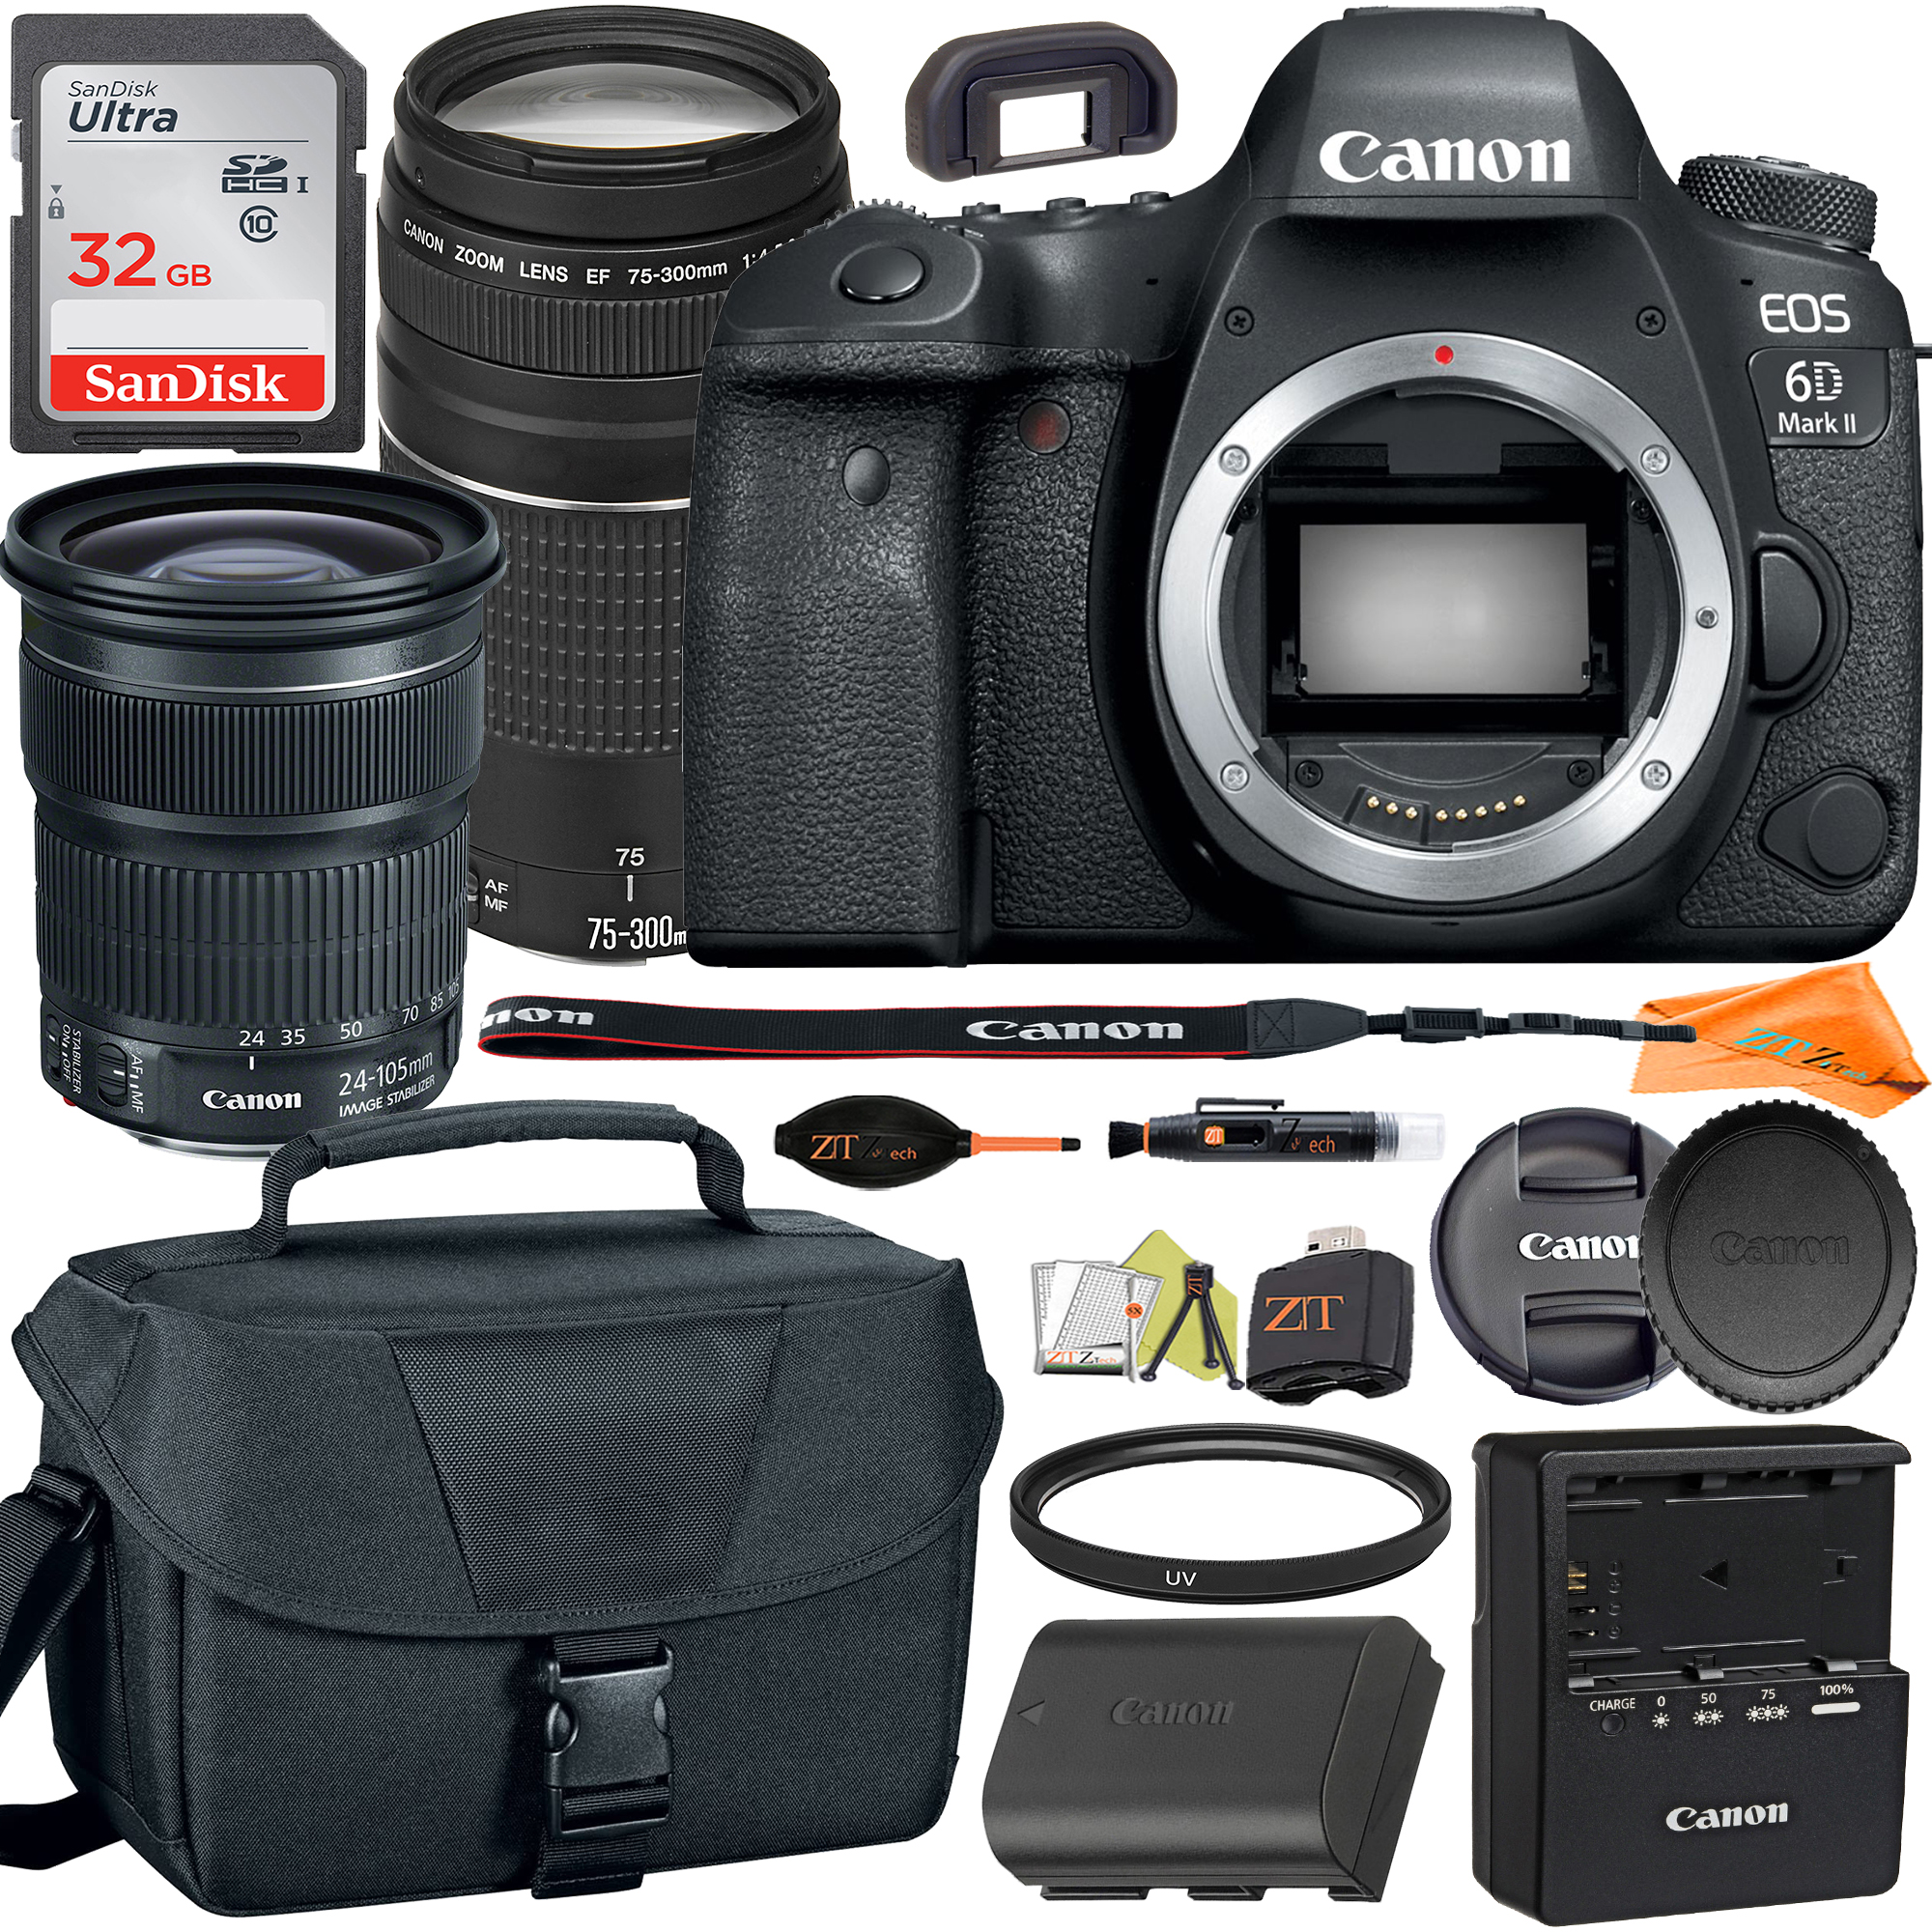 Canon EOS 6D Mark II DSLR Camera with 24-105mm + 75-300mm Lens with SanDisk 32GB Card + Case + ZeeTech Accessory Bundle